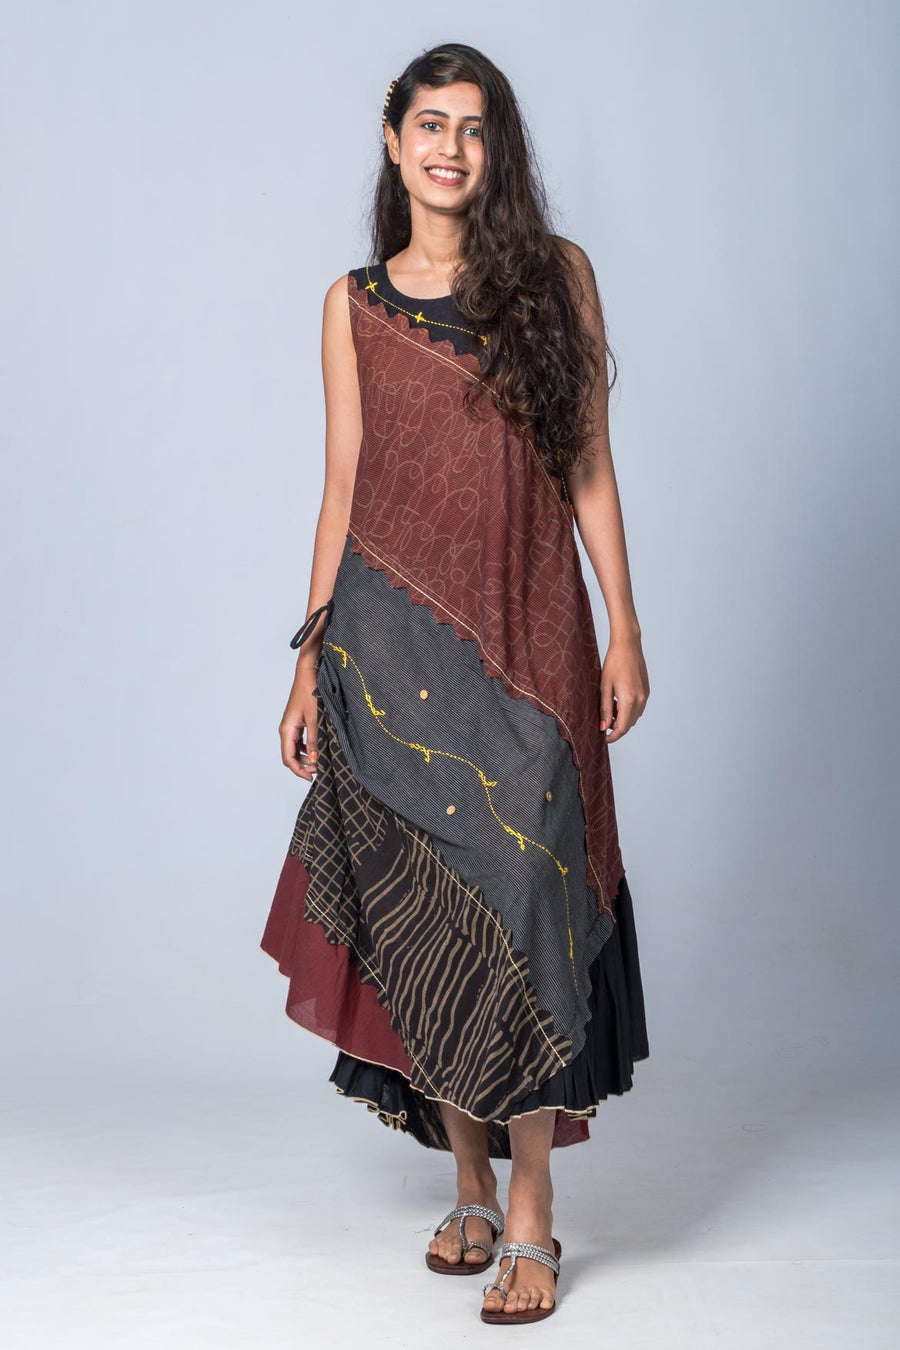 Aarnavi-Upcycled Organic Cotton Maroon and Black Dress